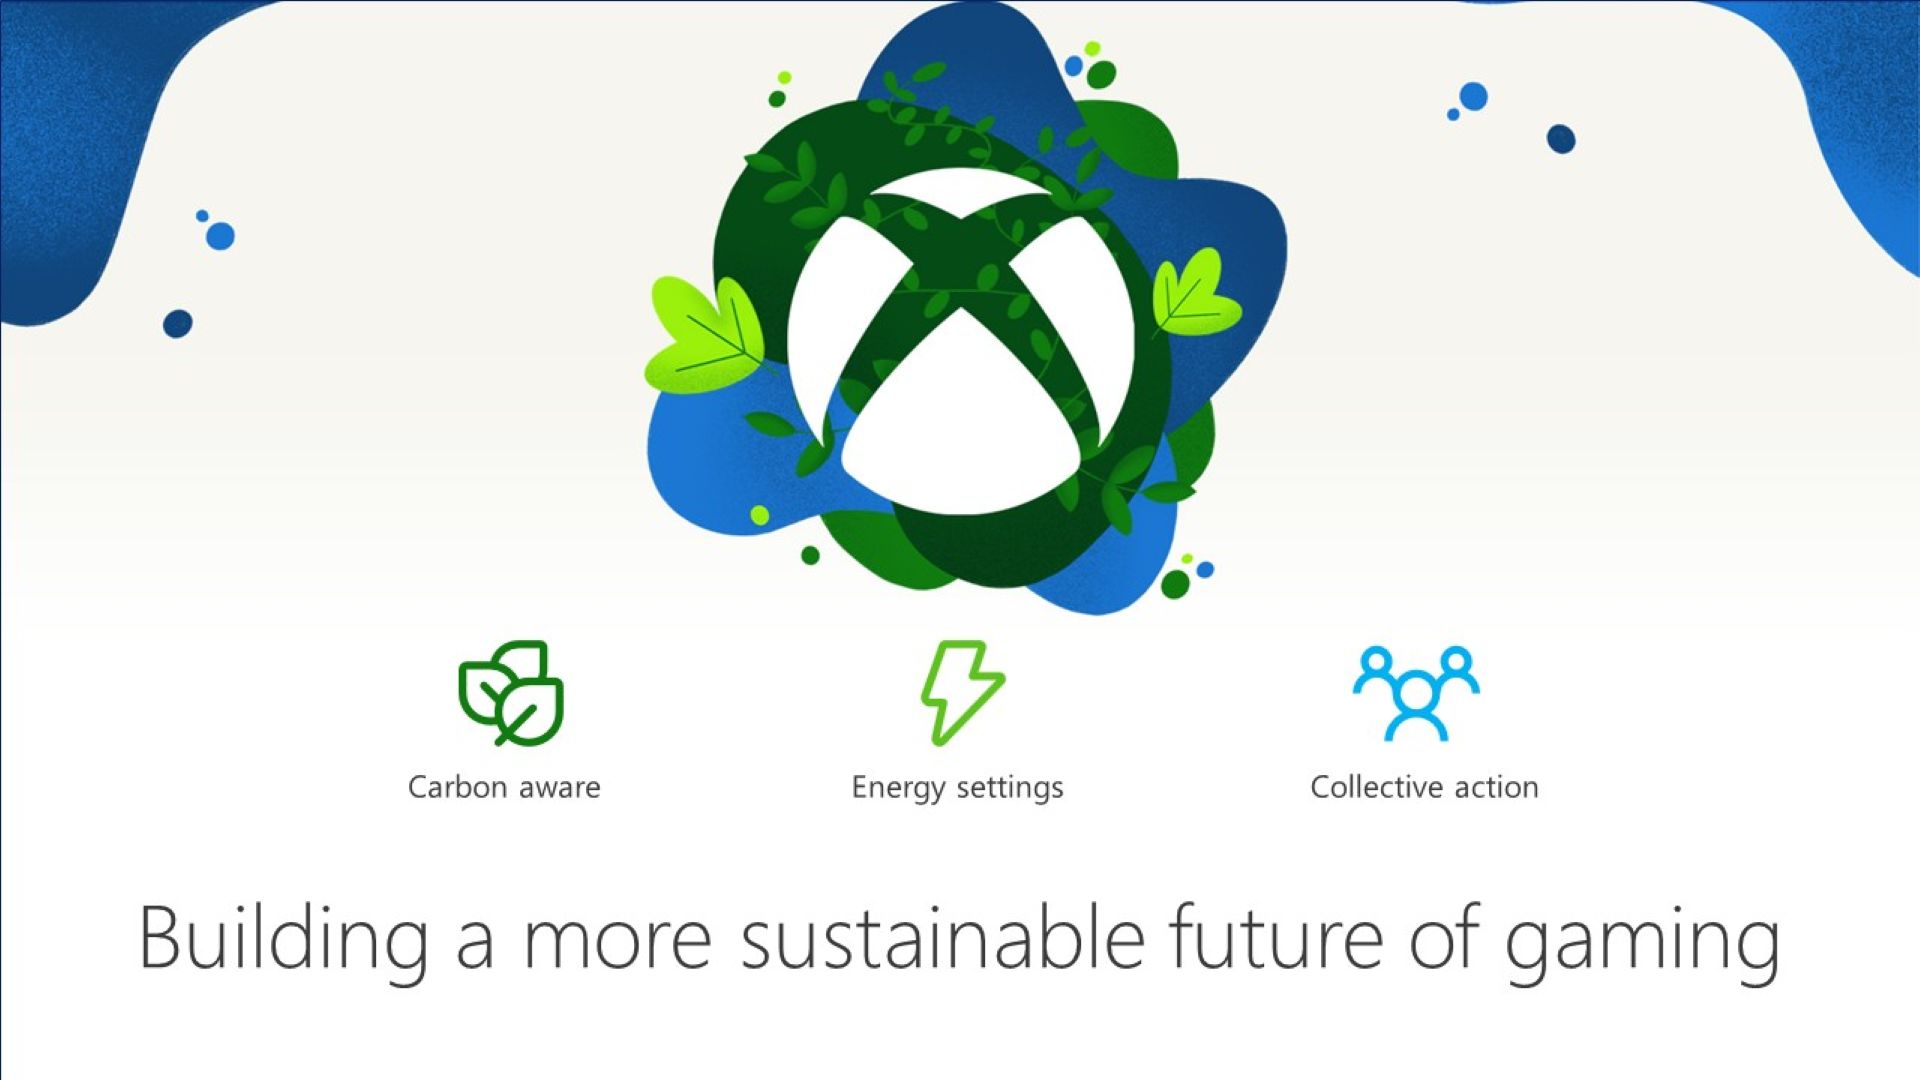 Xbox Is Now the First Carbon Aware Console, Update Rolling Out to Everyone Soon